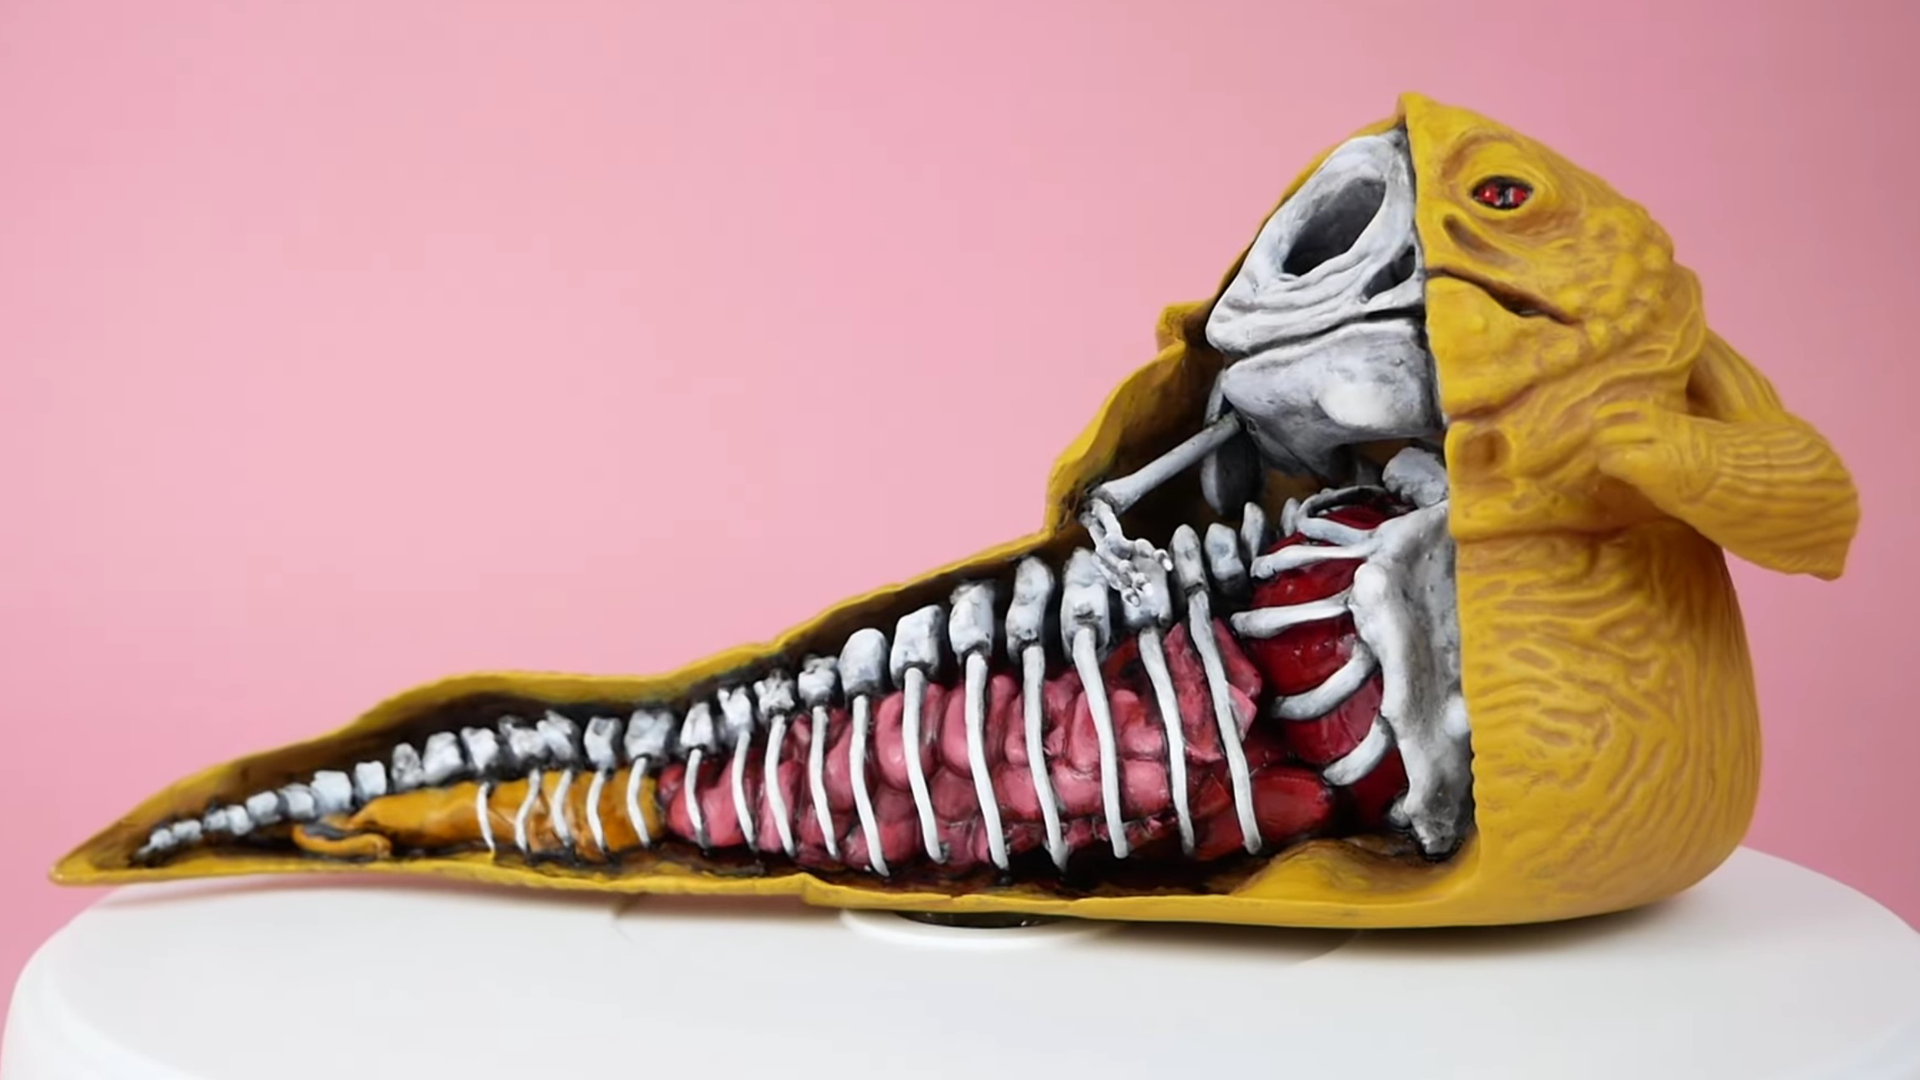 This Jabba the Hutt 3D-Printed Anatomical Sculpture Is Unpleasant